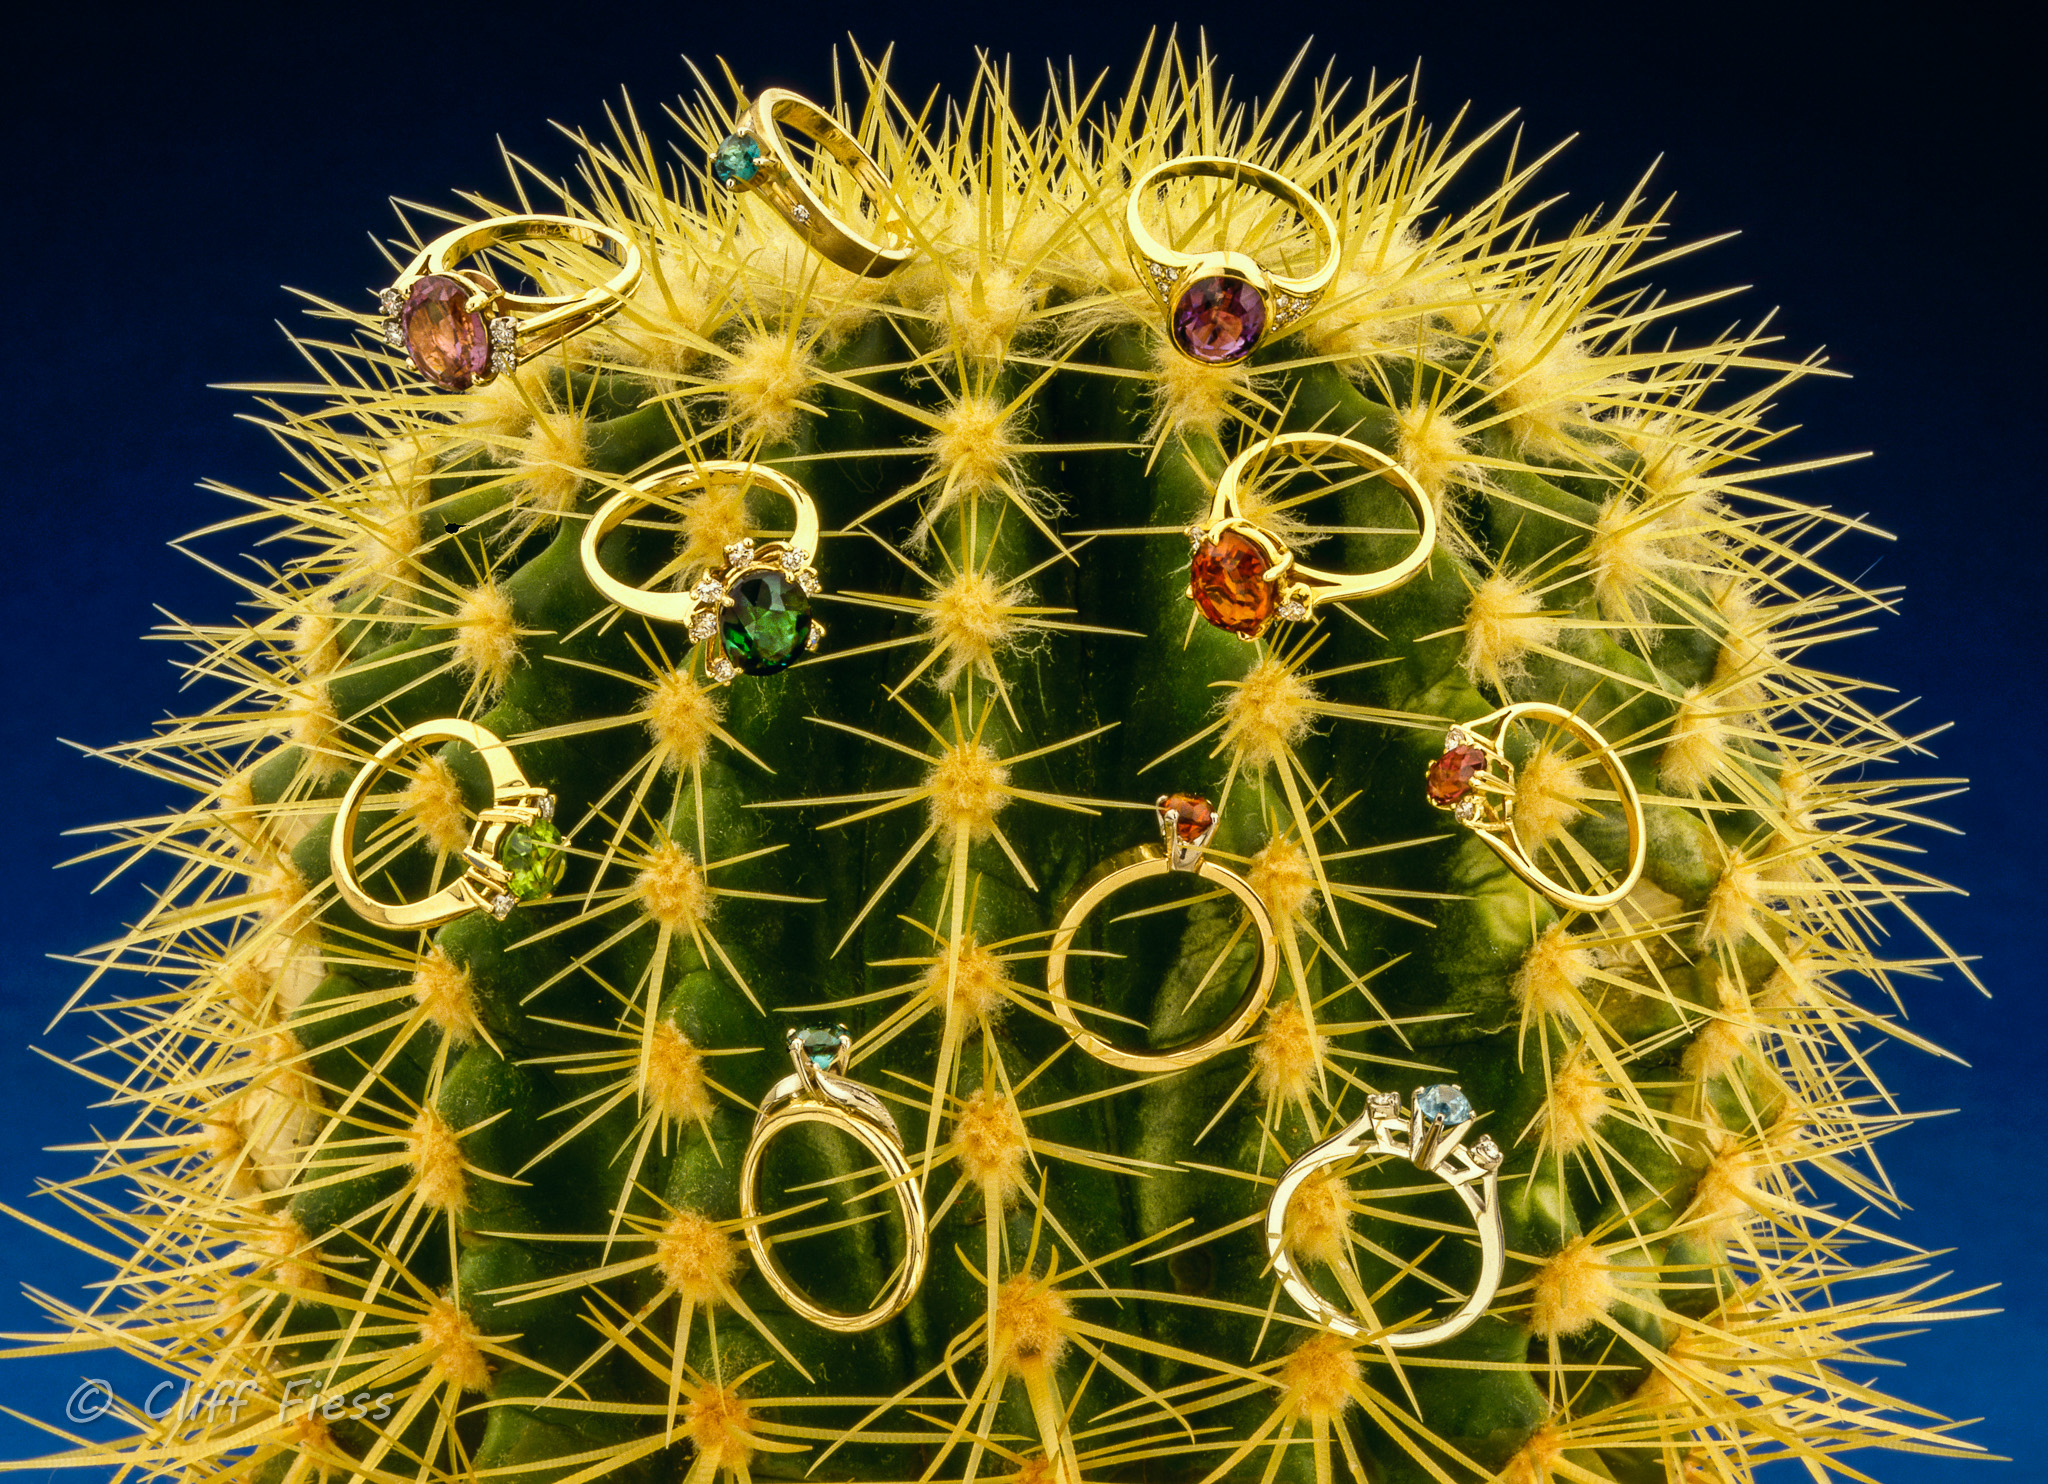 A cactus that apparently grows precious rings